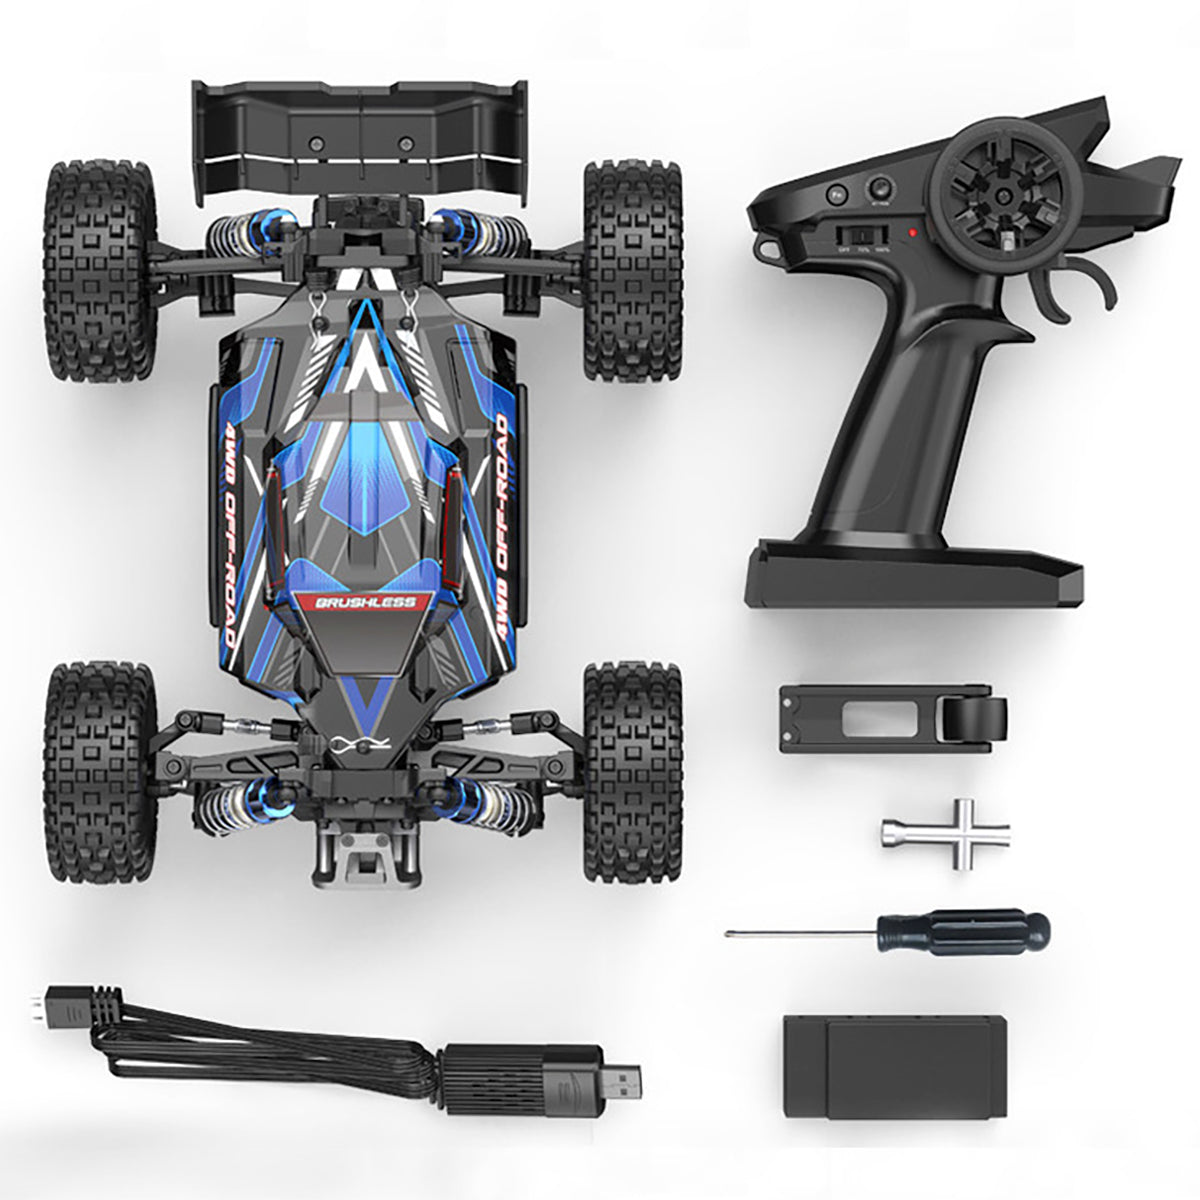 MJX 1:16 4WD Brushless Fast Adult RC Car, 42 MPH Top Speed Hobby Grade Electric Racing Buggy, All Wheel Drive Offroad RC Car